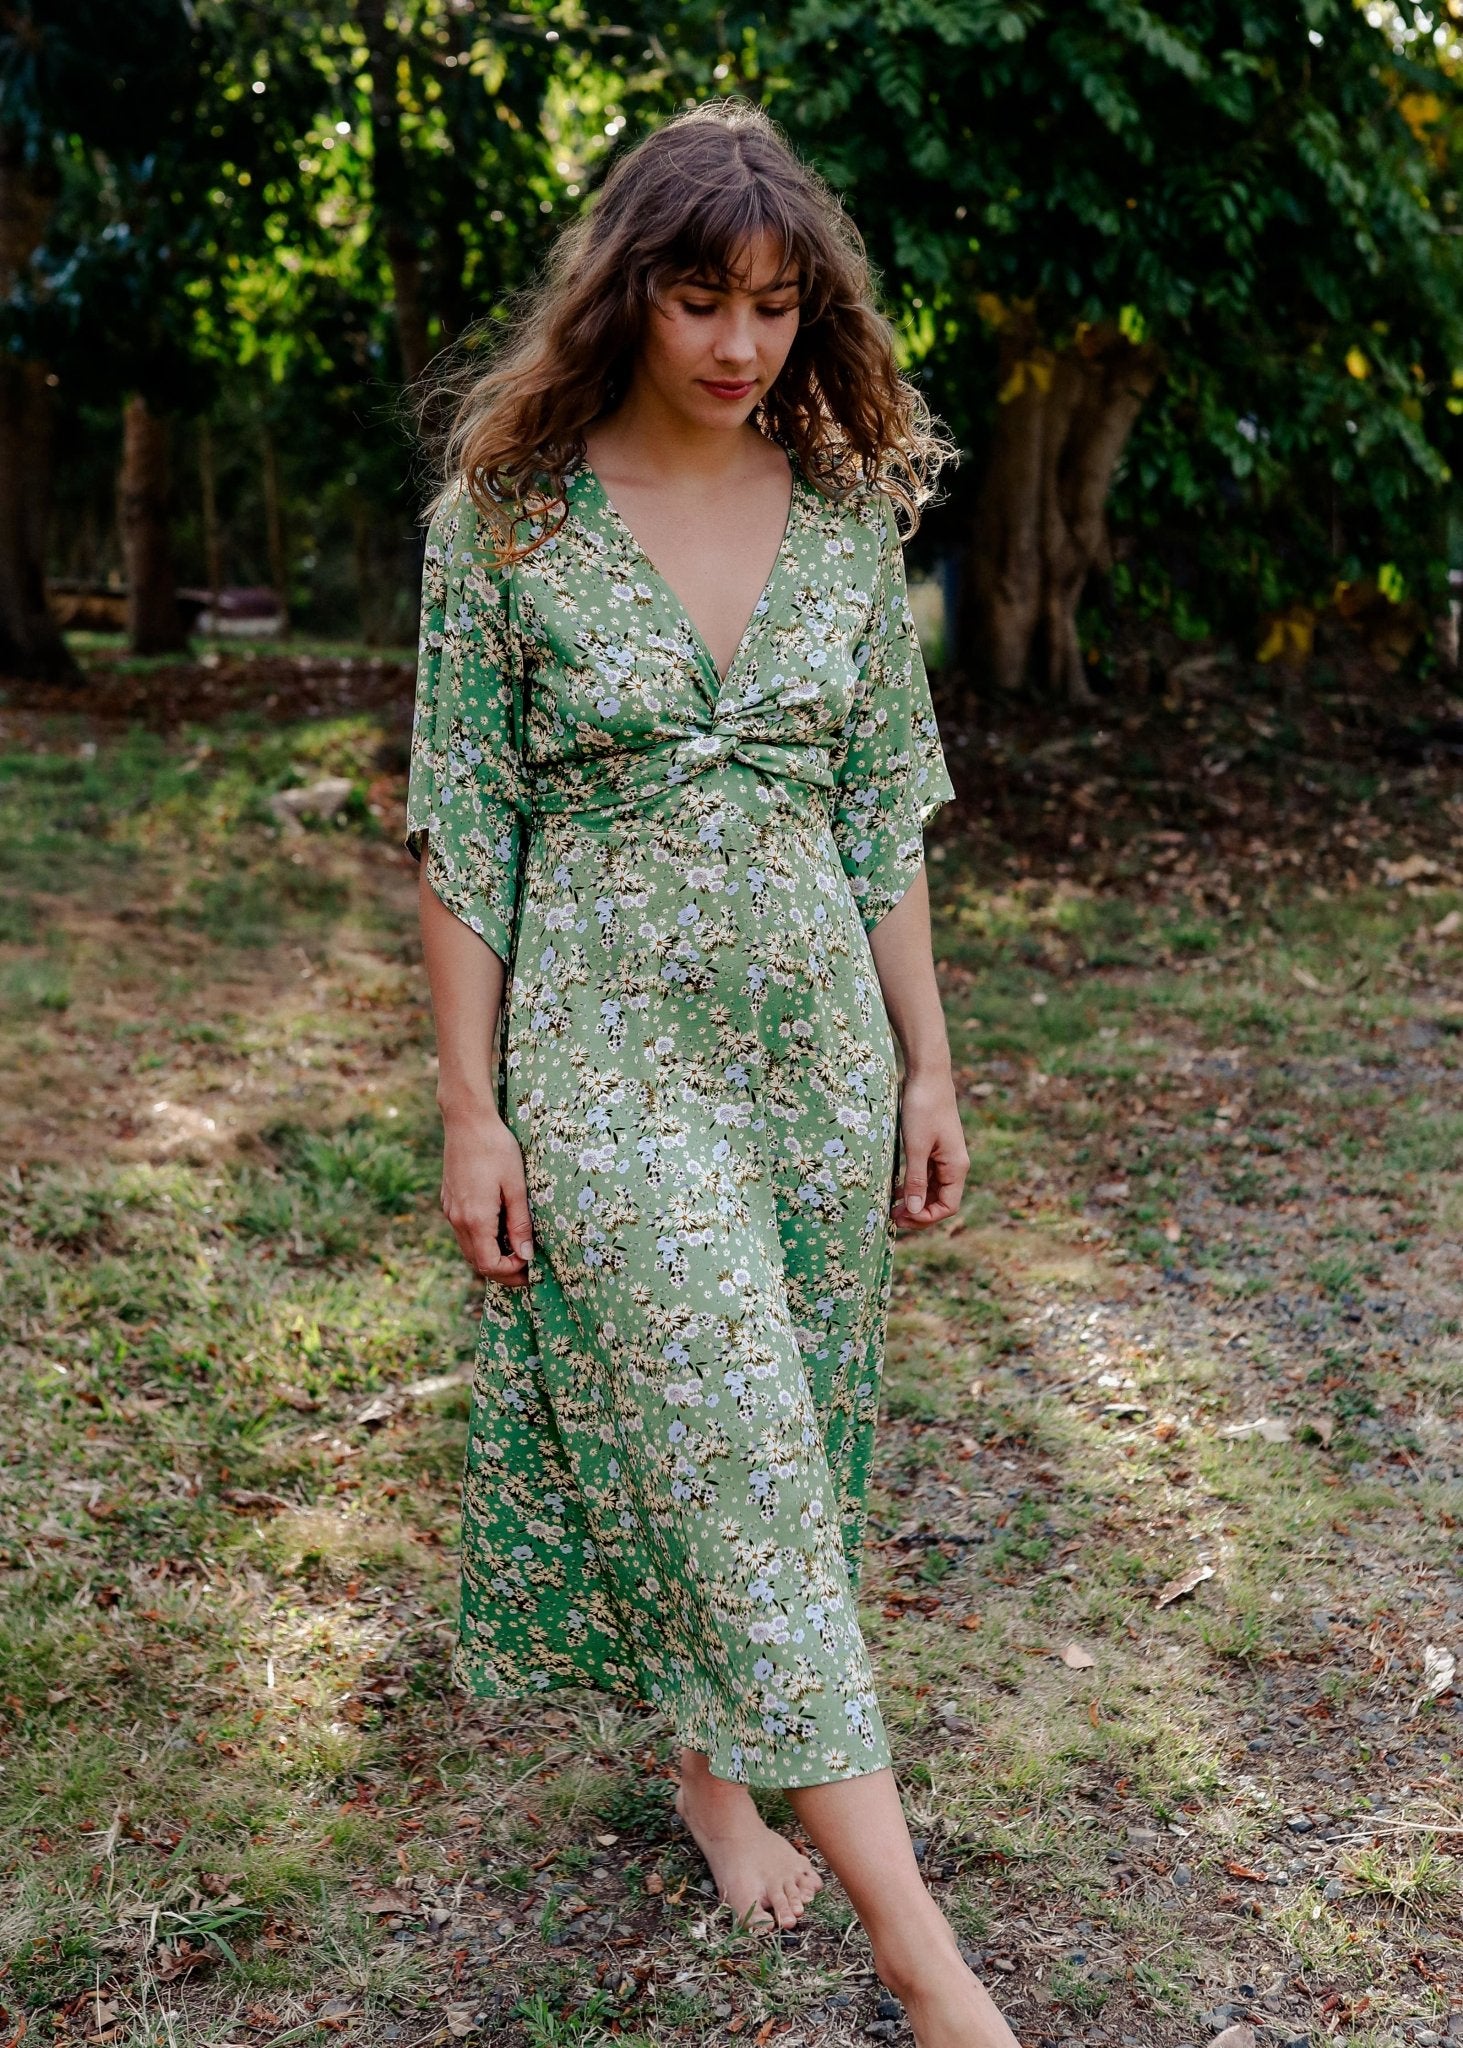 The Lost Wrap Dress Morning Meadow-tasi-travels-stride